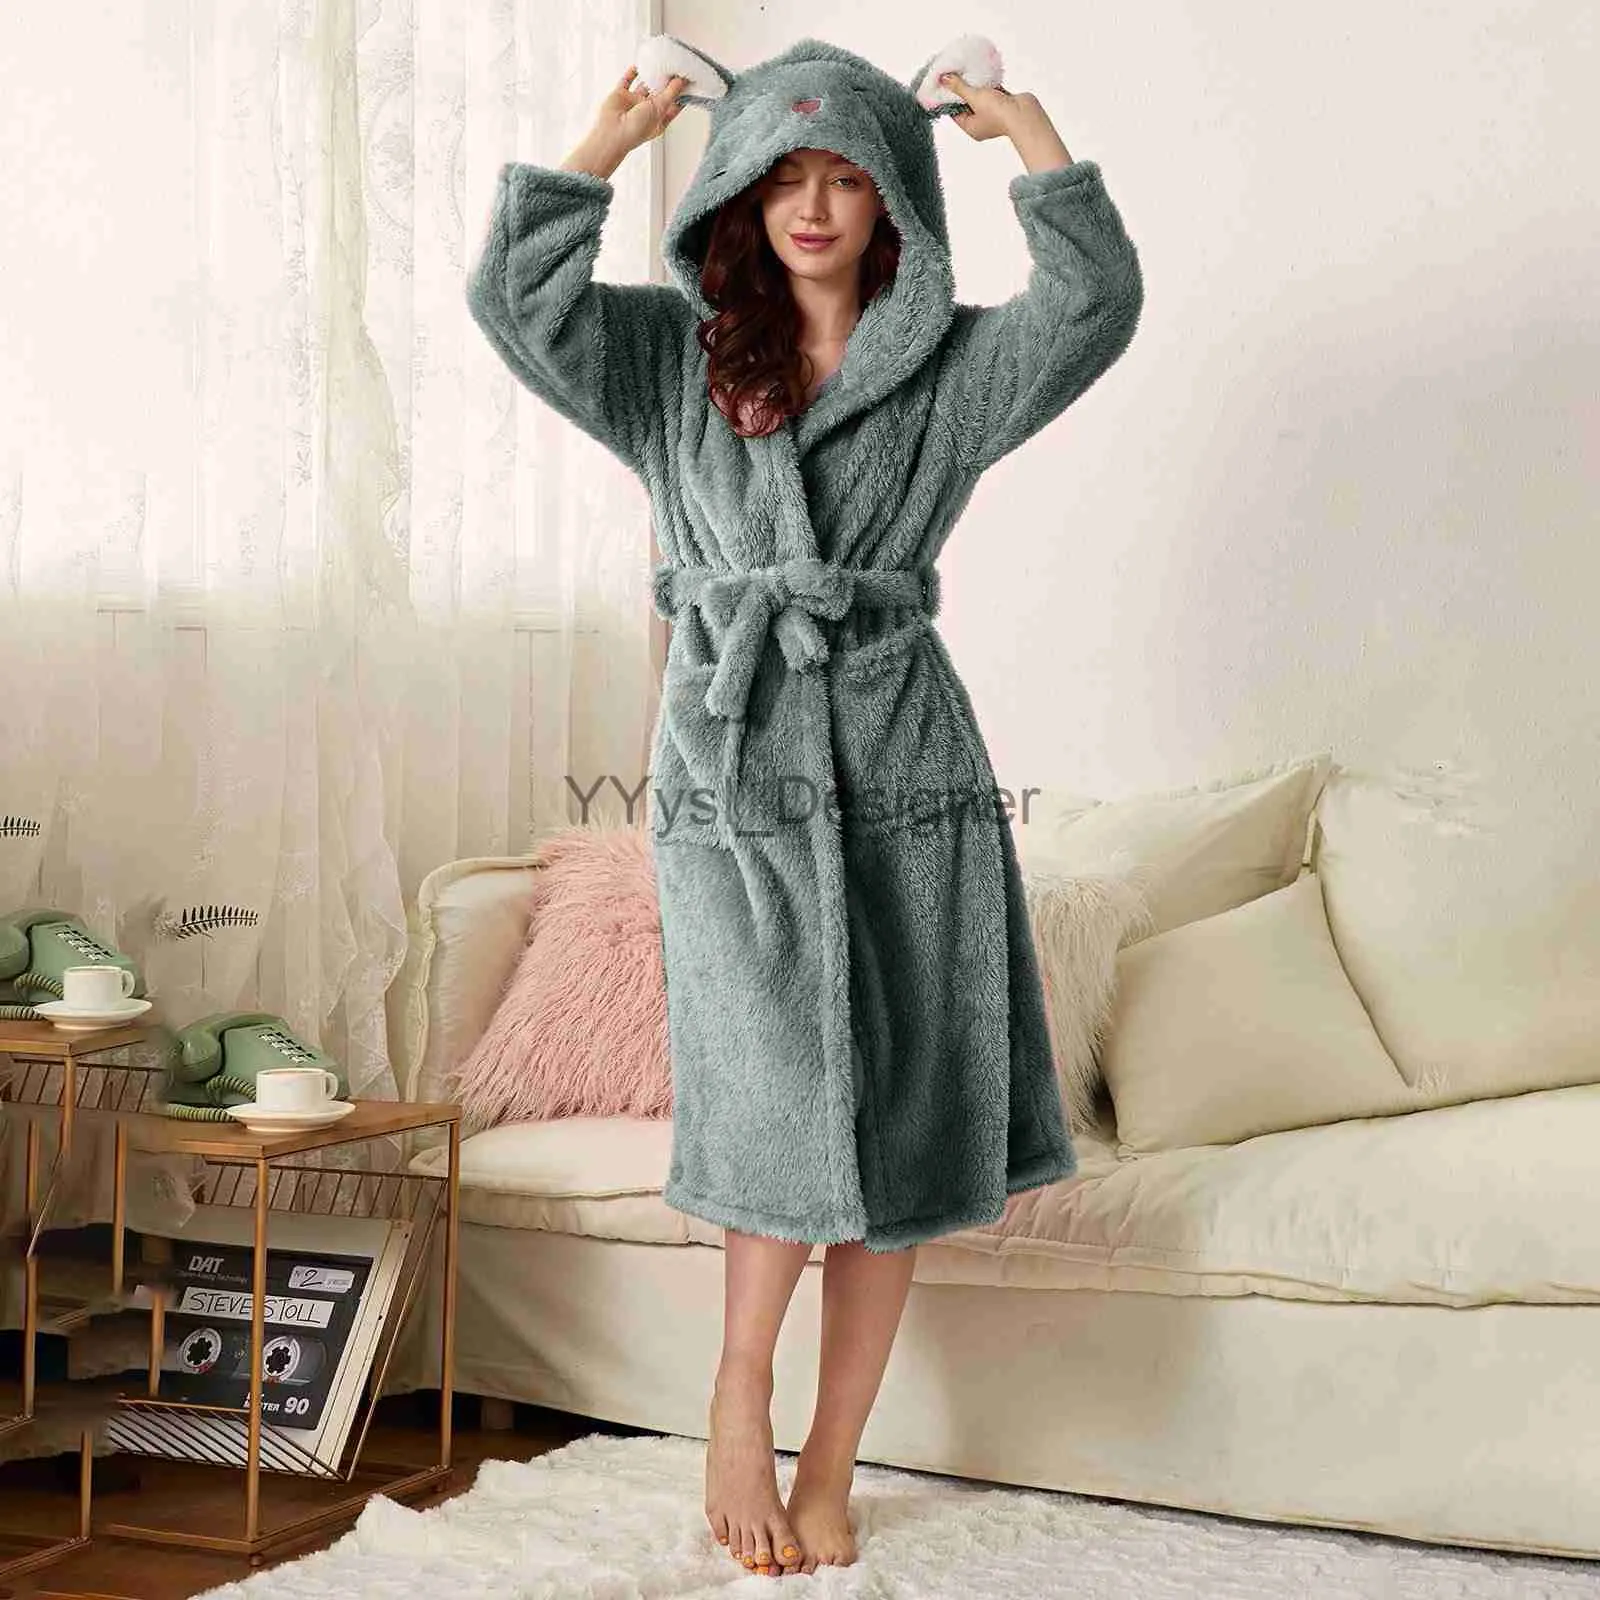 Womens Double Pocket Hooded Flannel Bathrobe With 3D Ear Buttons Soft And  Warm Double Faced Velvet Hooded Towel Robe Wrap X0822 From Yyysl_designer,  $15.91